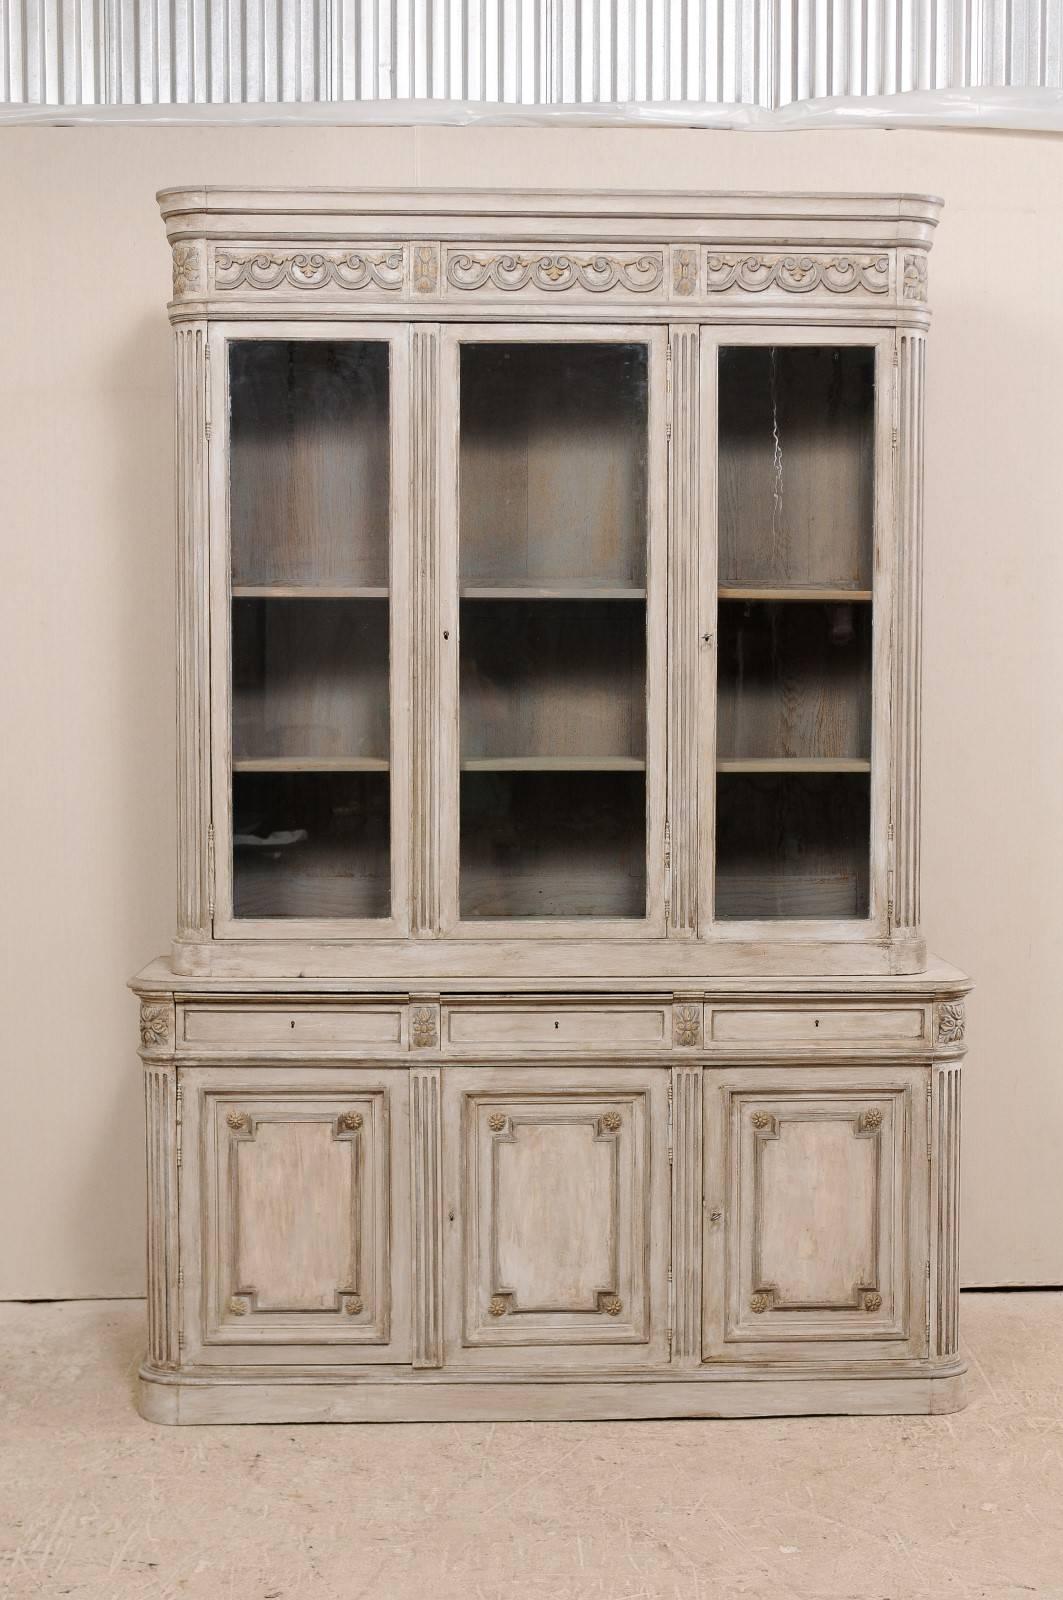 A 19th century French tall wood and glass cabinet. This tall French antique cabinet has three upper glass doors, resting on a base with three small drawers followed by three wood doors directly below. This piece features a raised cornice which is